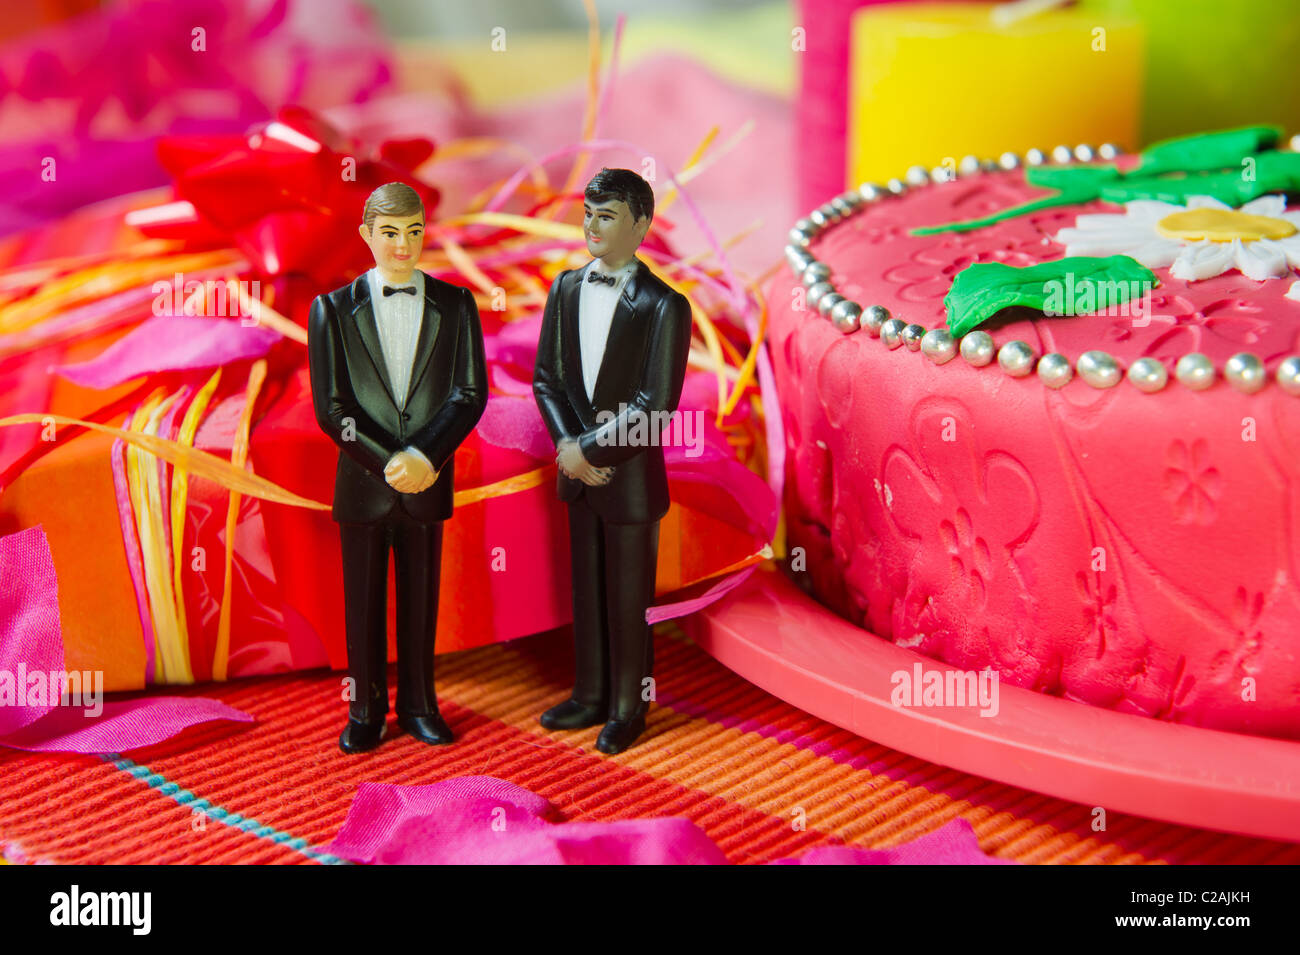 Wedding gay couple in front of a cake in pink still life Stock Photo